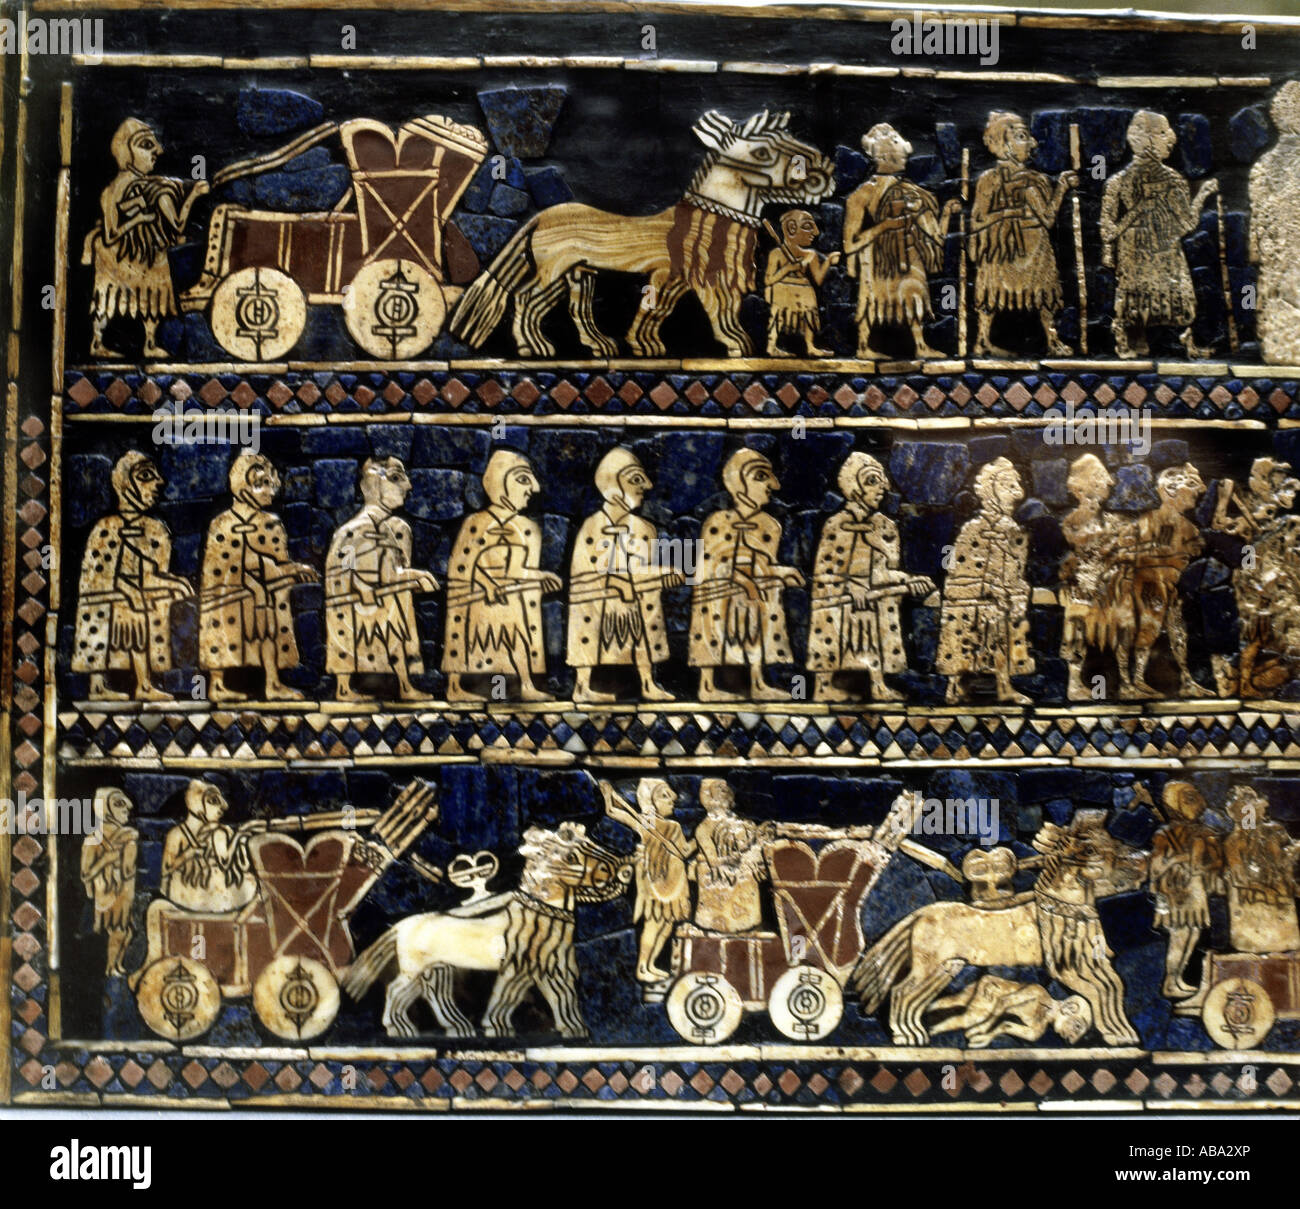 ancient world, Mesopotamia, Sumer, mosaic, Standard of Ur, left side, 'war side', royal tomb 779, early dynastic period, 2850 - 2350 BC, British Museum, London, , Stock Photo